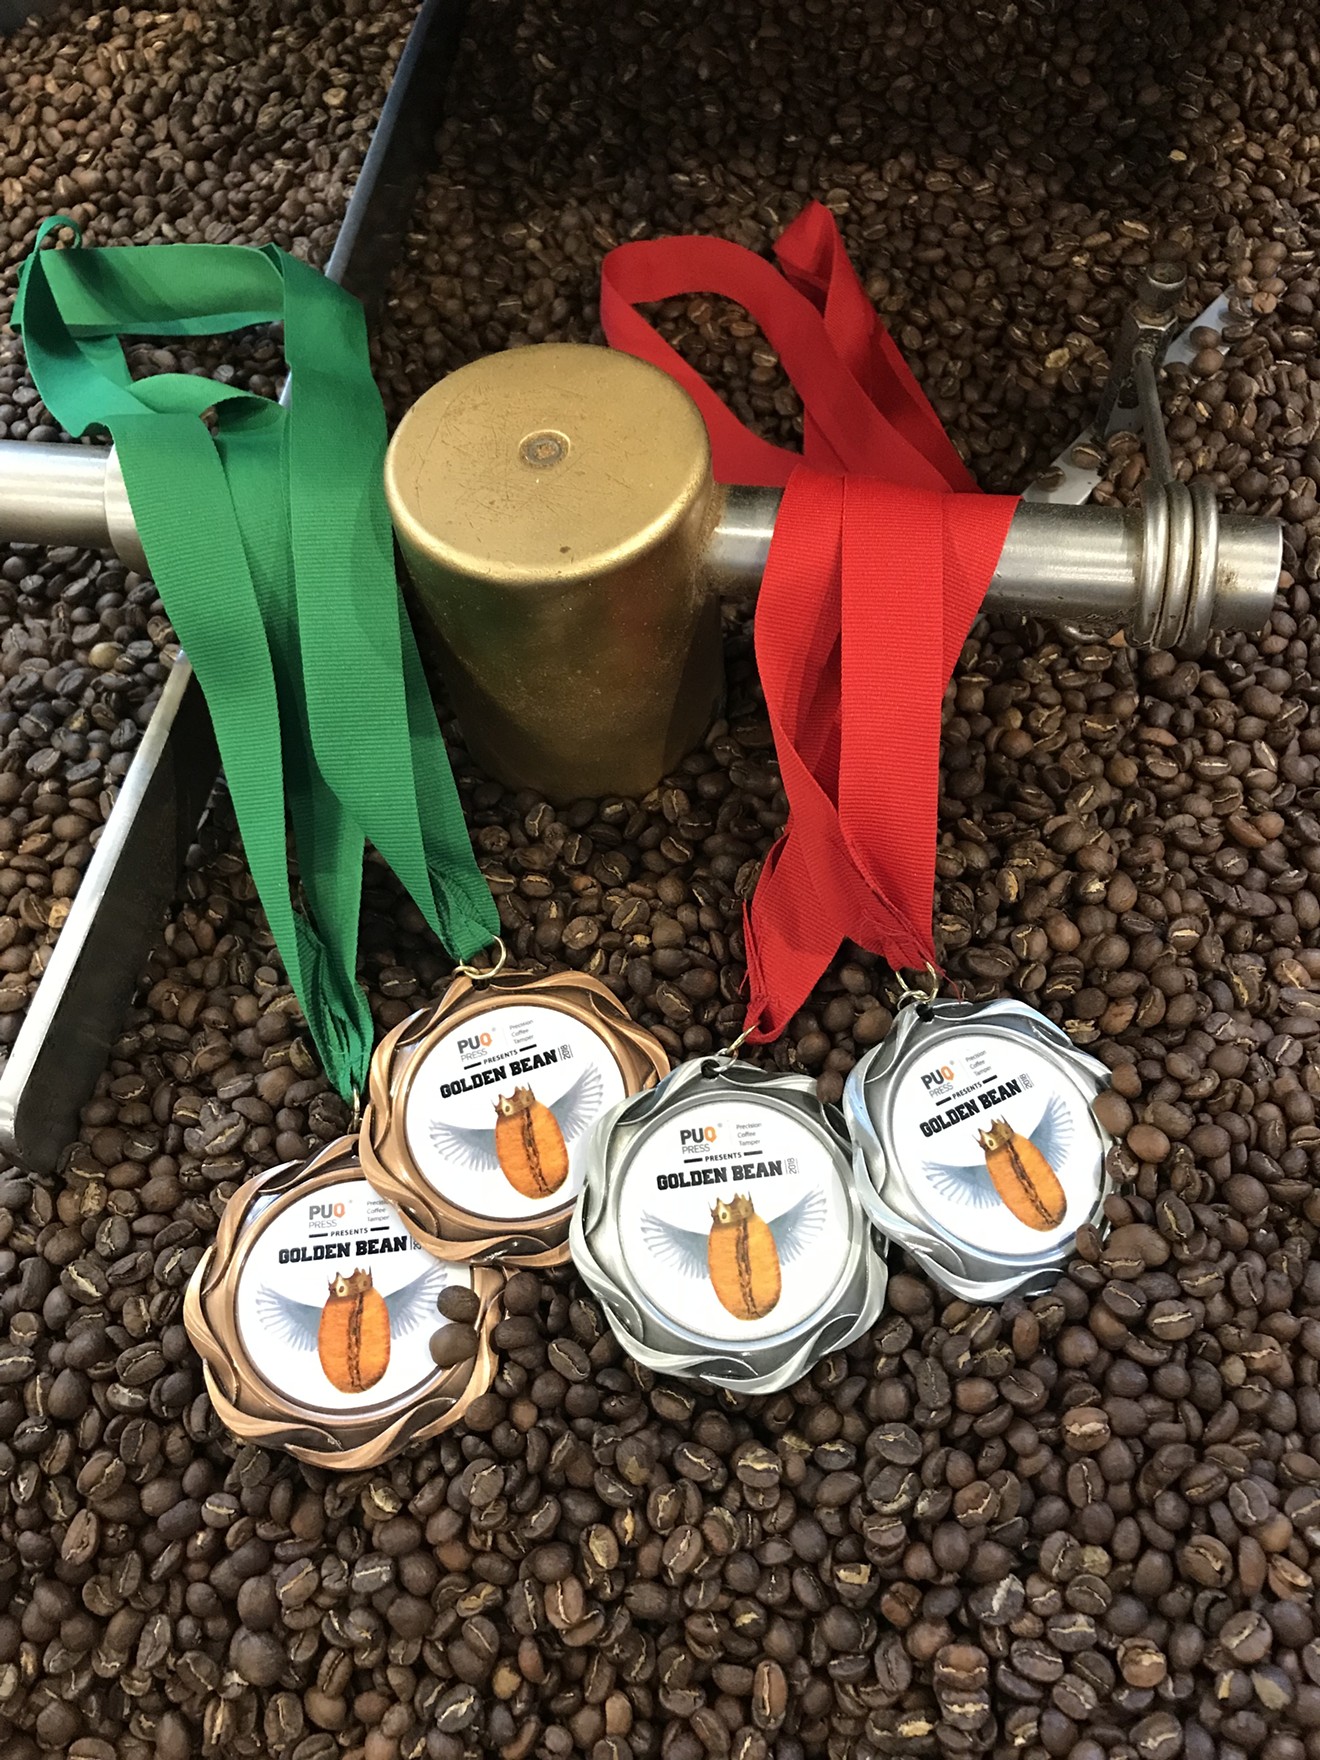 Medals and the coffee that won Pablo's recognition at the Golden Bean coffee competition.